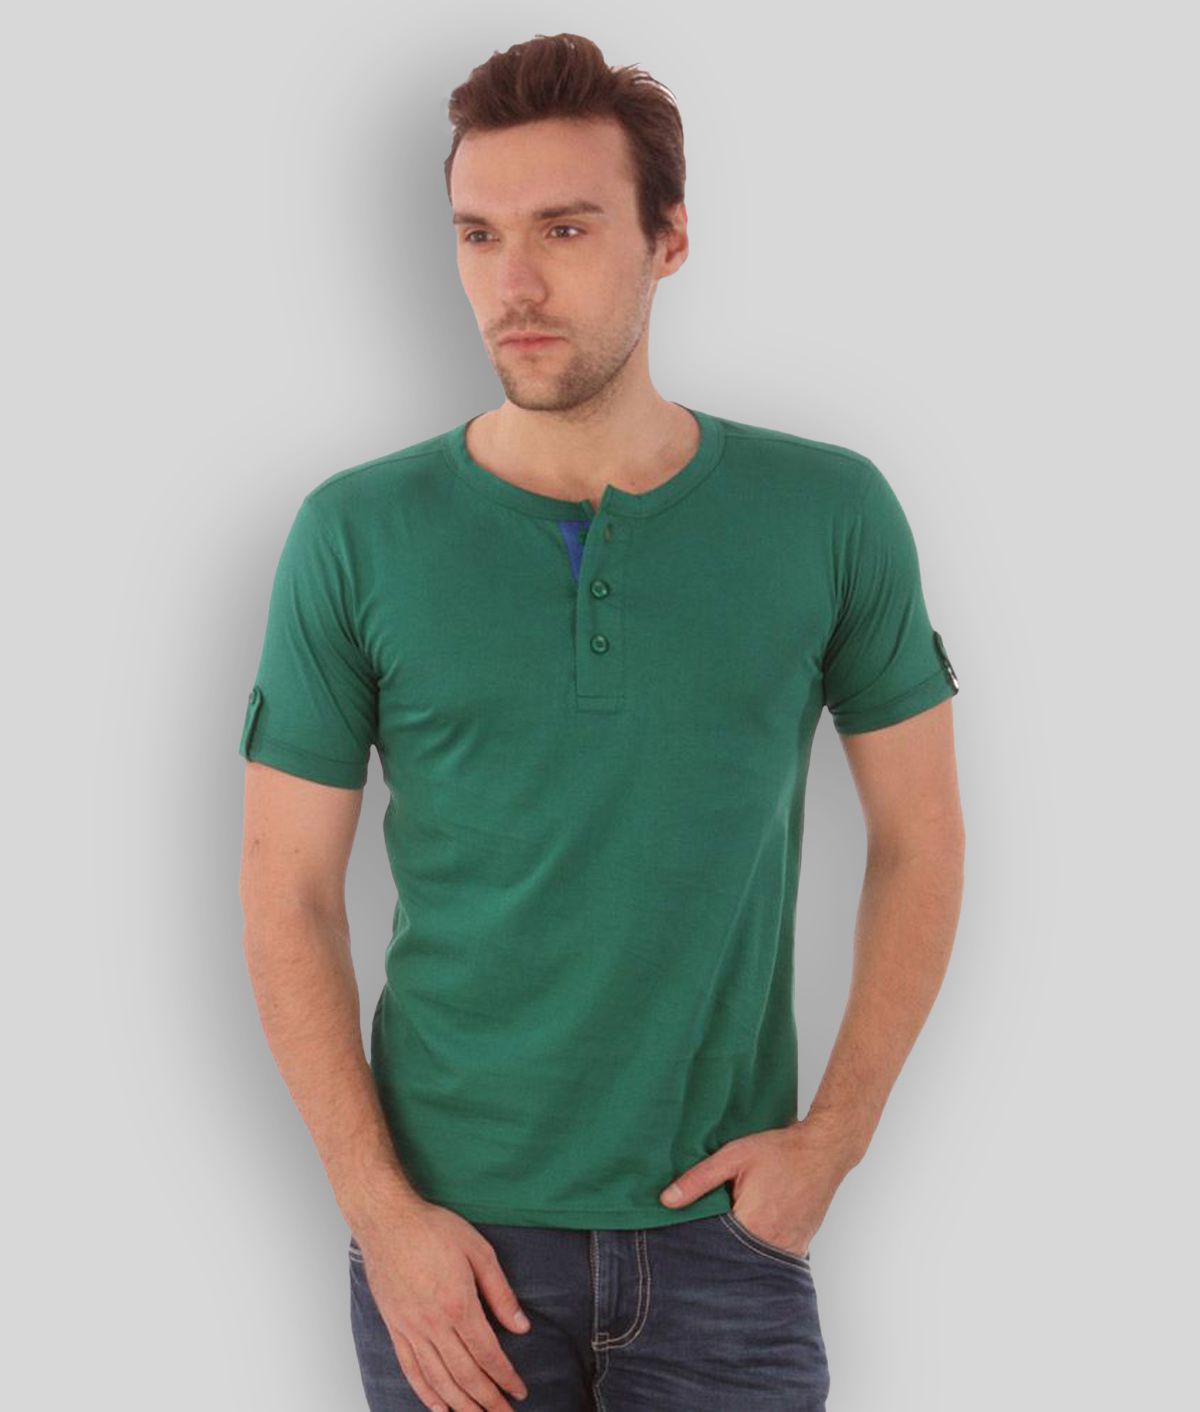     			Campus Sutra - Green Cotton Regular Fit Men's T-Shirt ( Pack of 1 )